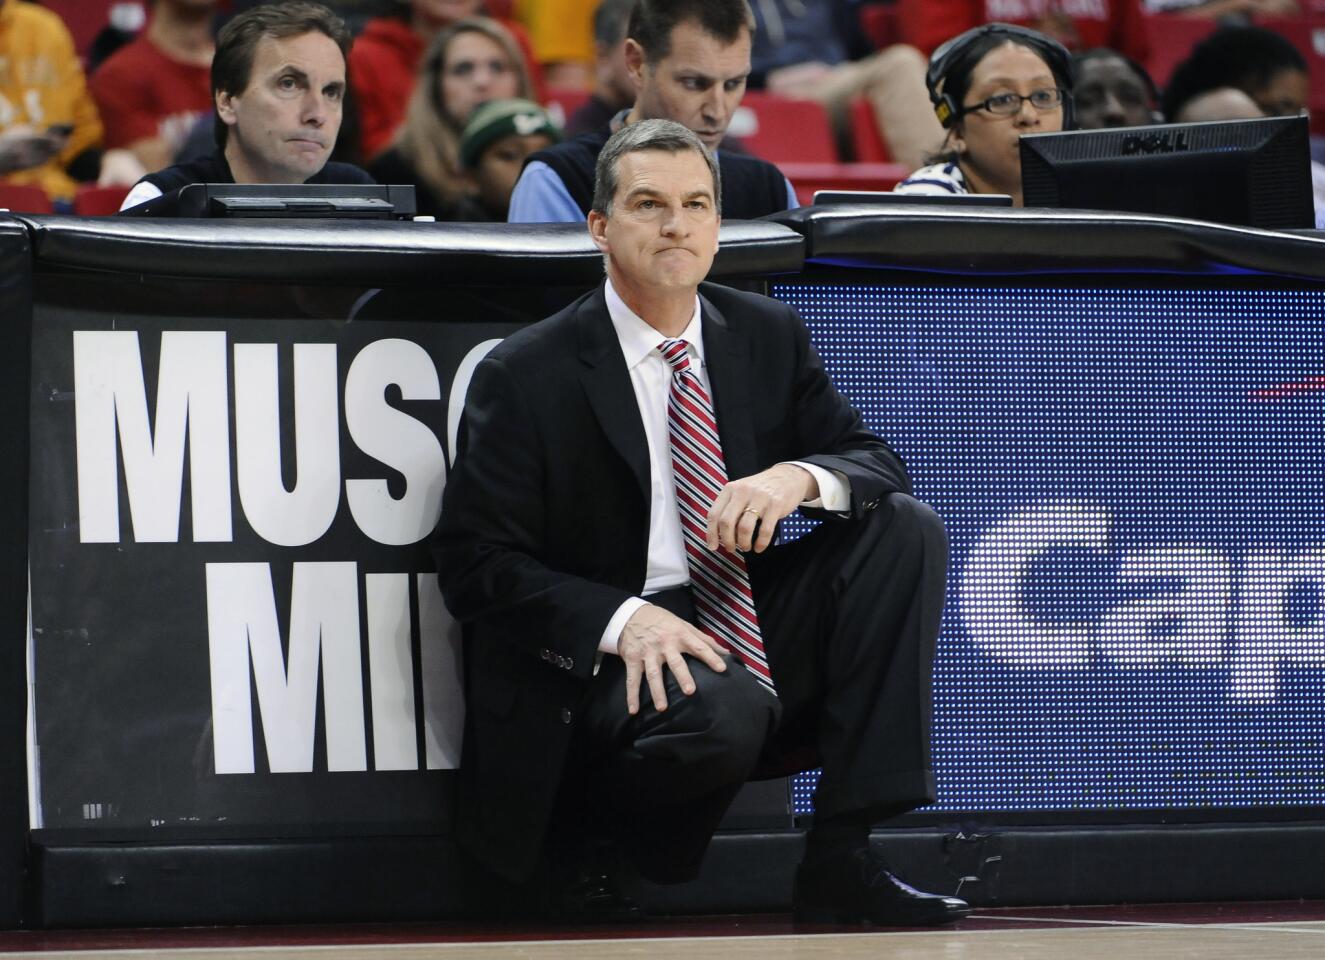 Maryland head coach Mark Turgeon is pictured during the second half.